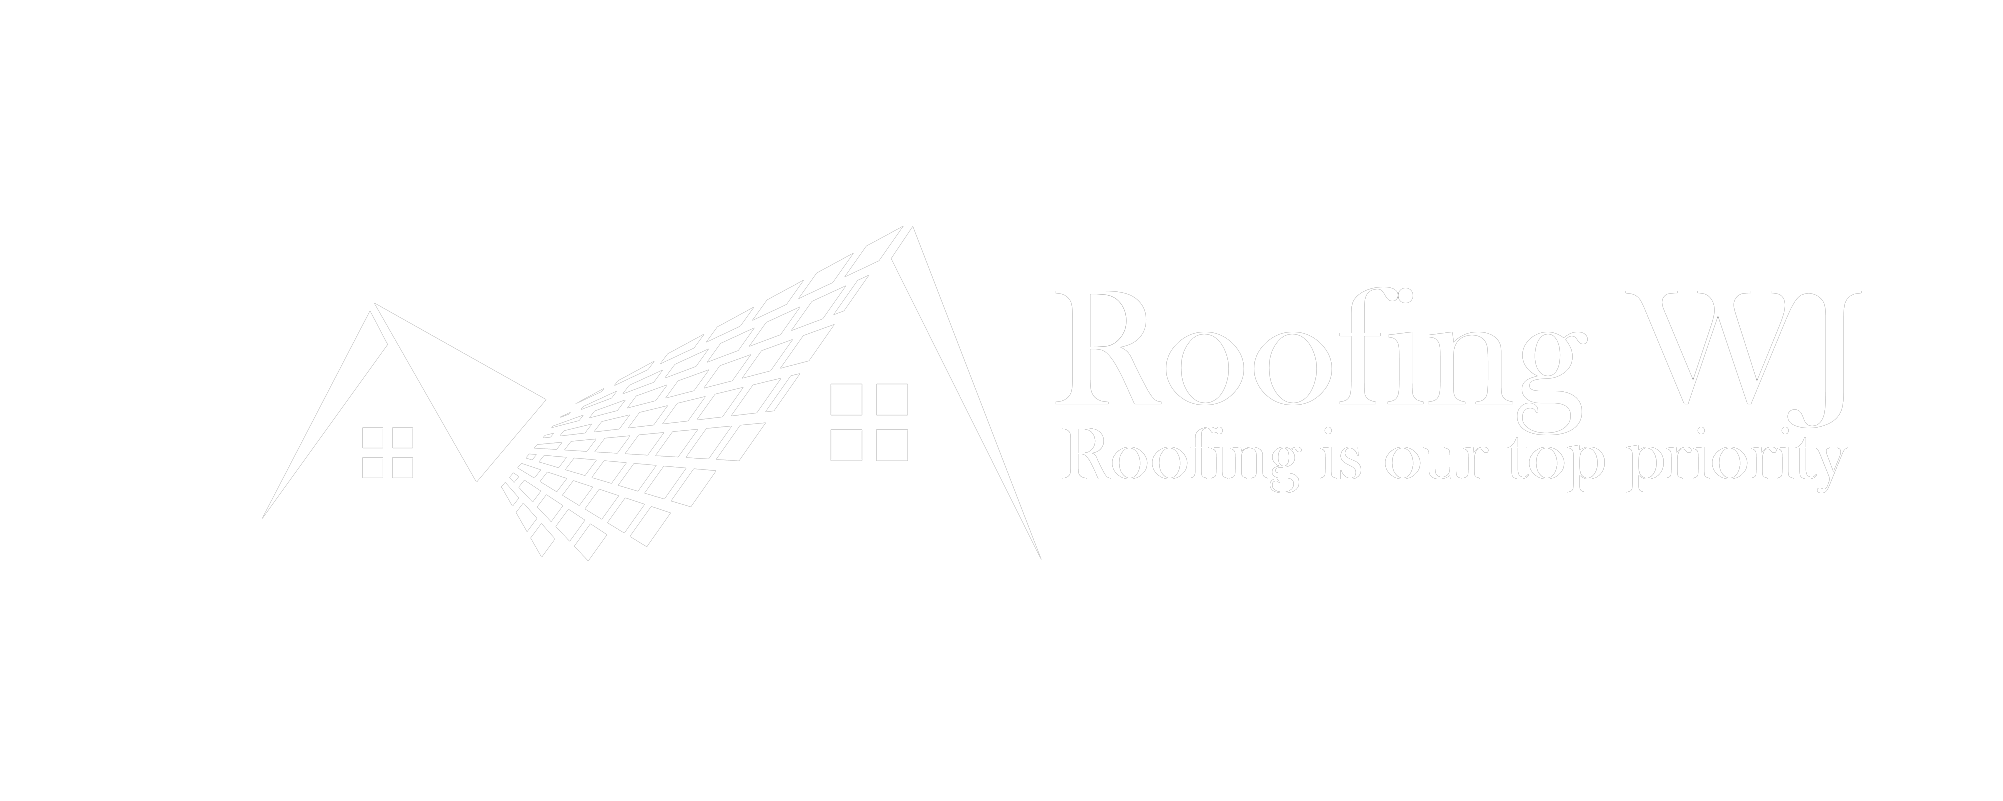 Roofing WJ